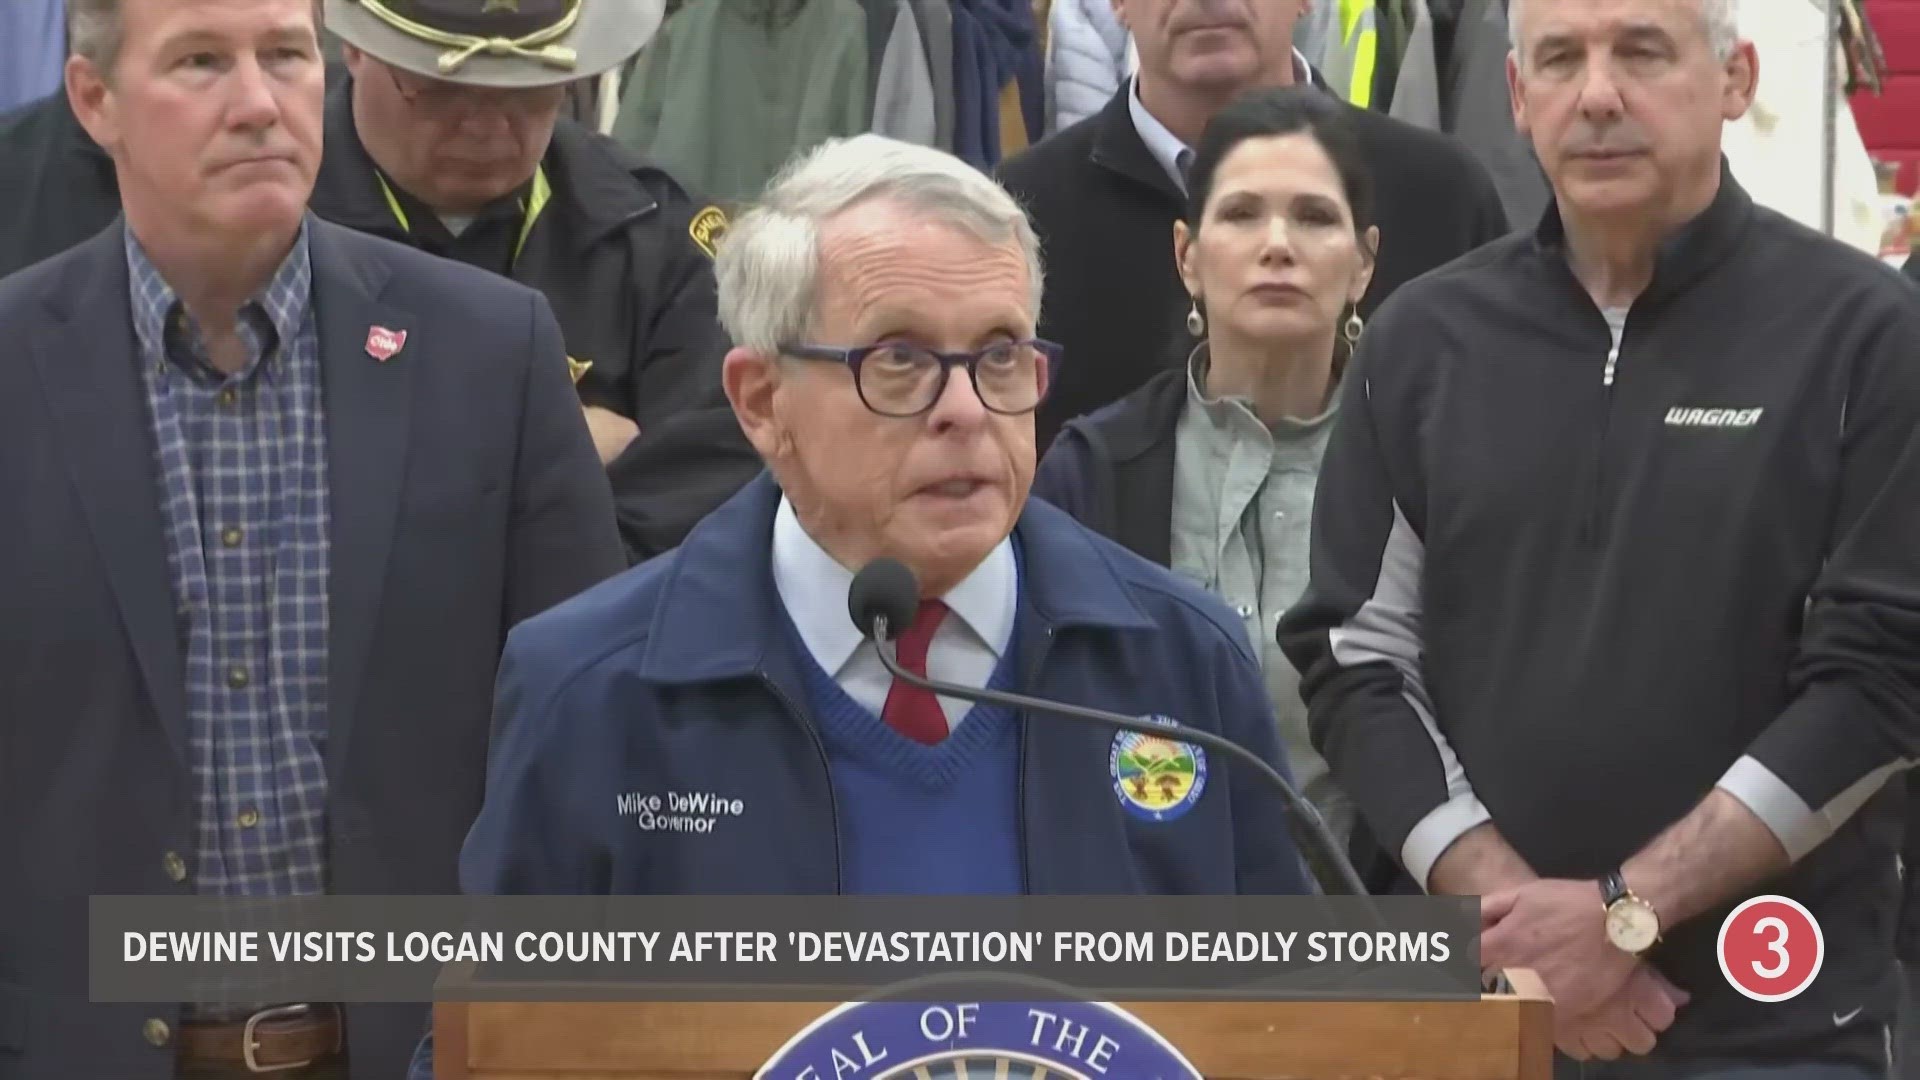 Ohio Gov. Mike DeWine visited Indian Lake on Friday and said at a press conference that "an awful lot of damage" remains.